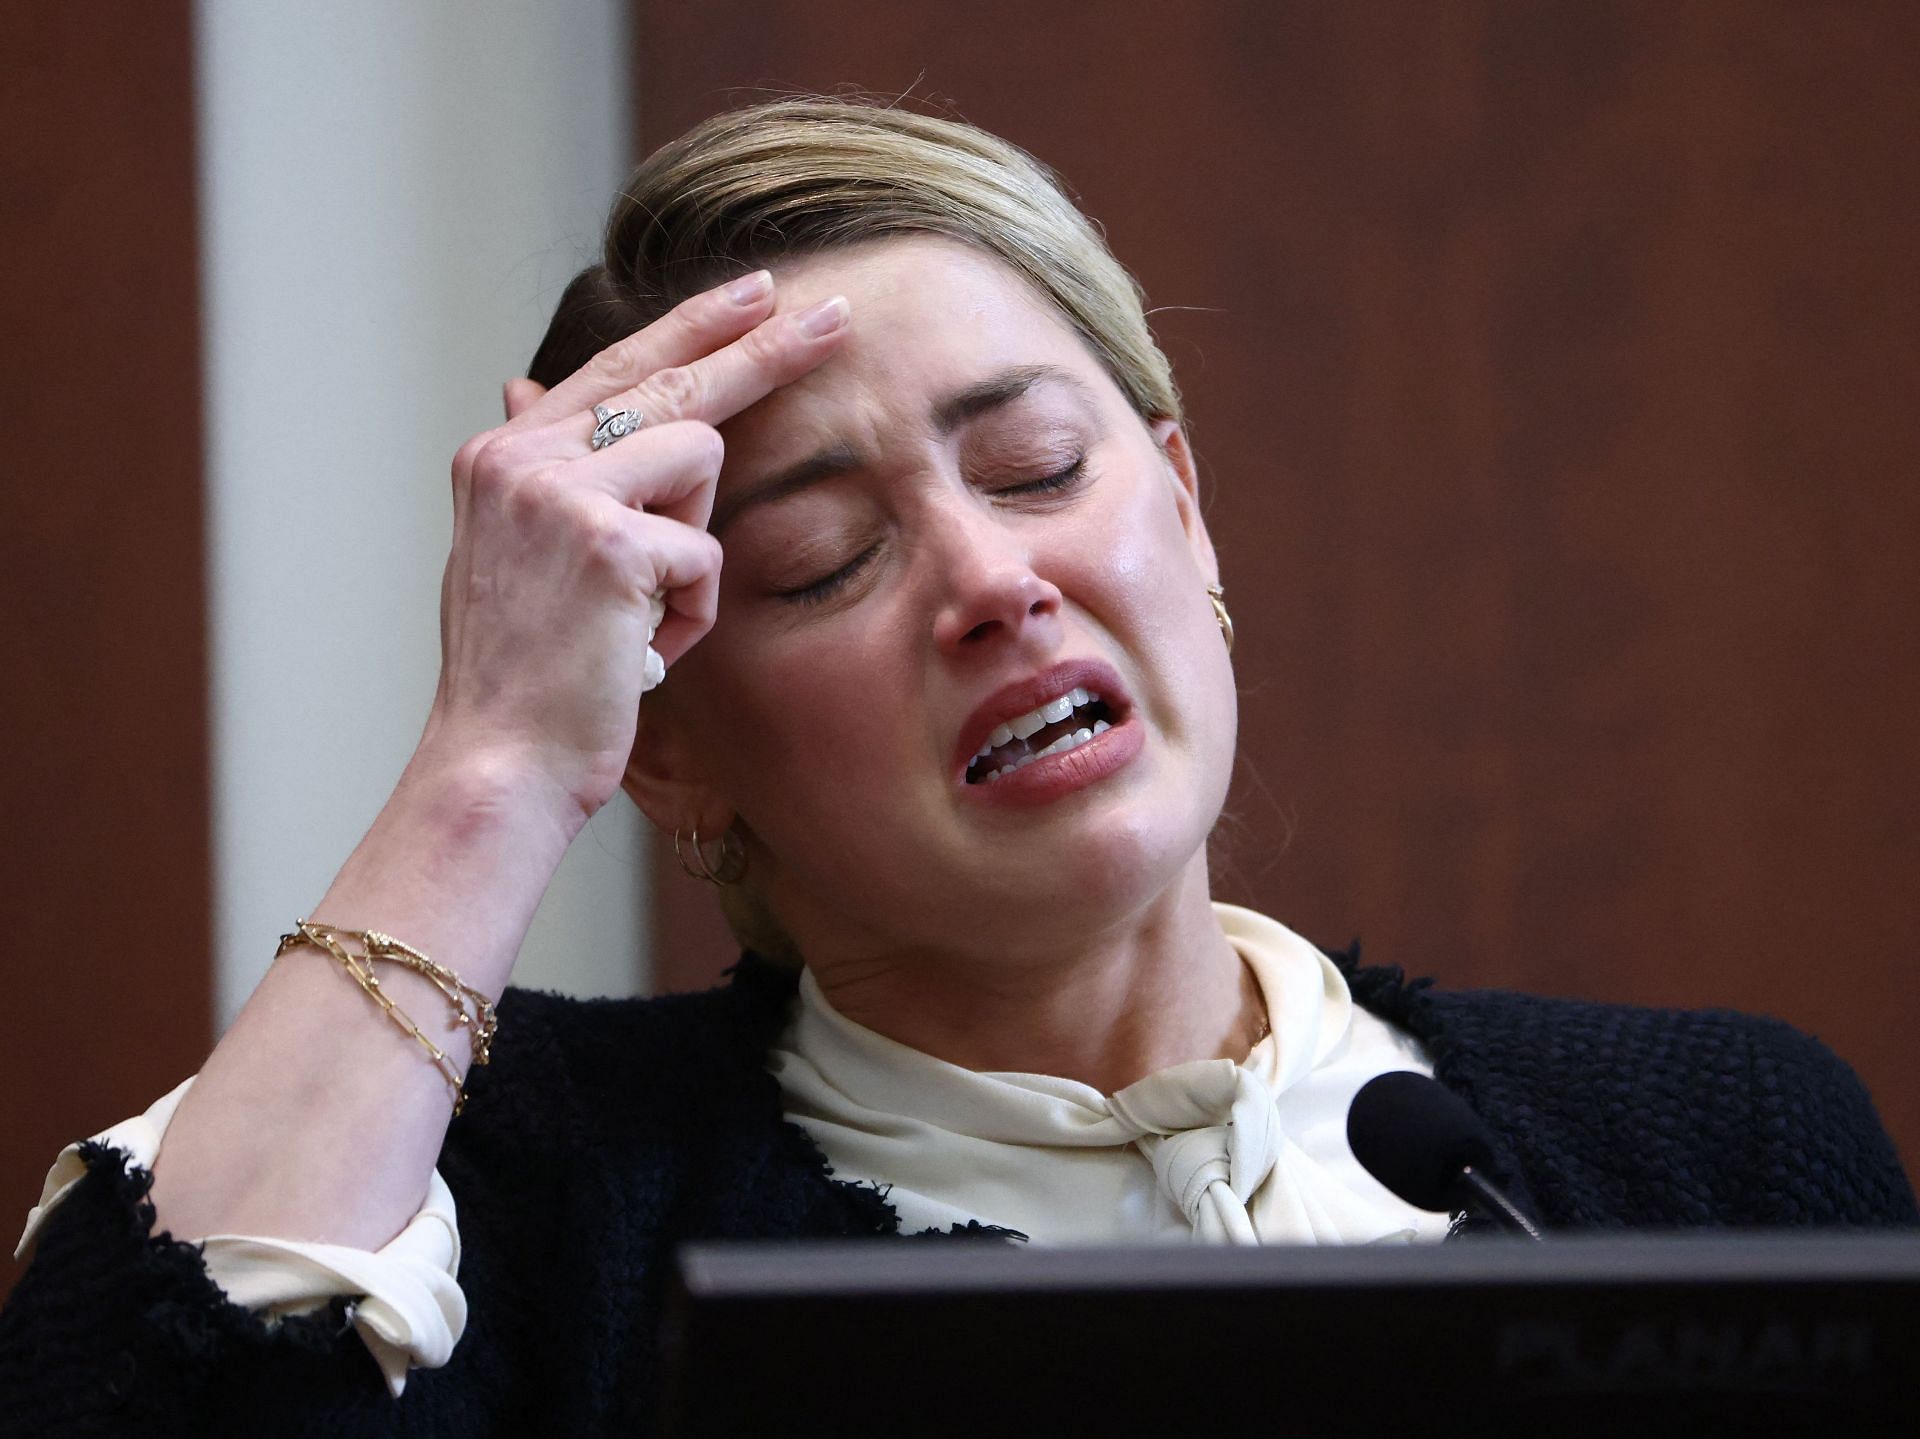 Representational image of Amber Heard crying in court (Image via Jim Lo Scalzo/POOL/AFP/Getty Images)